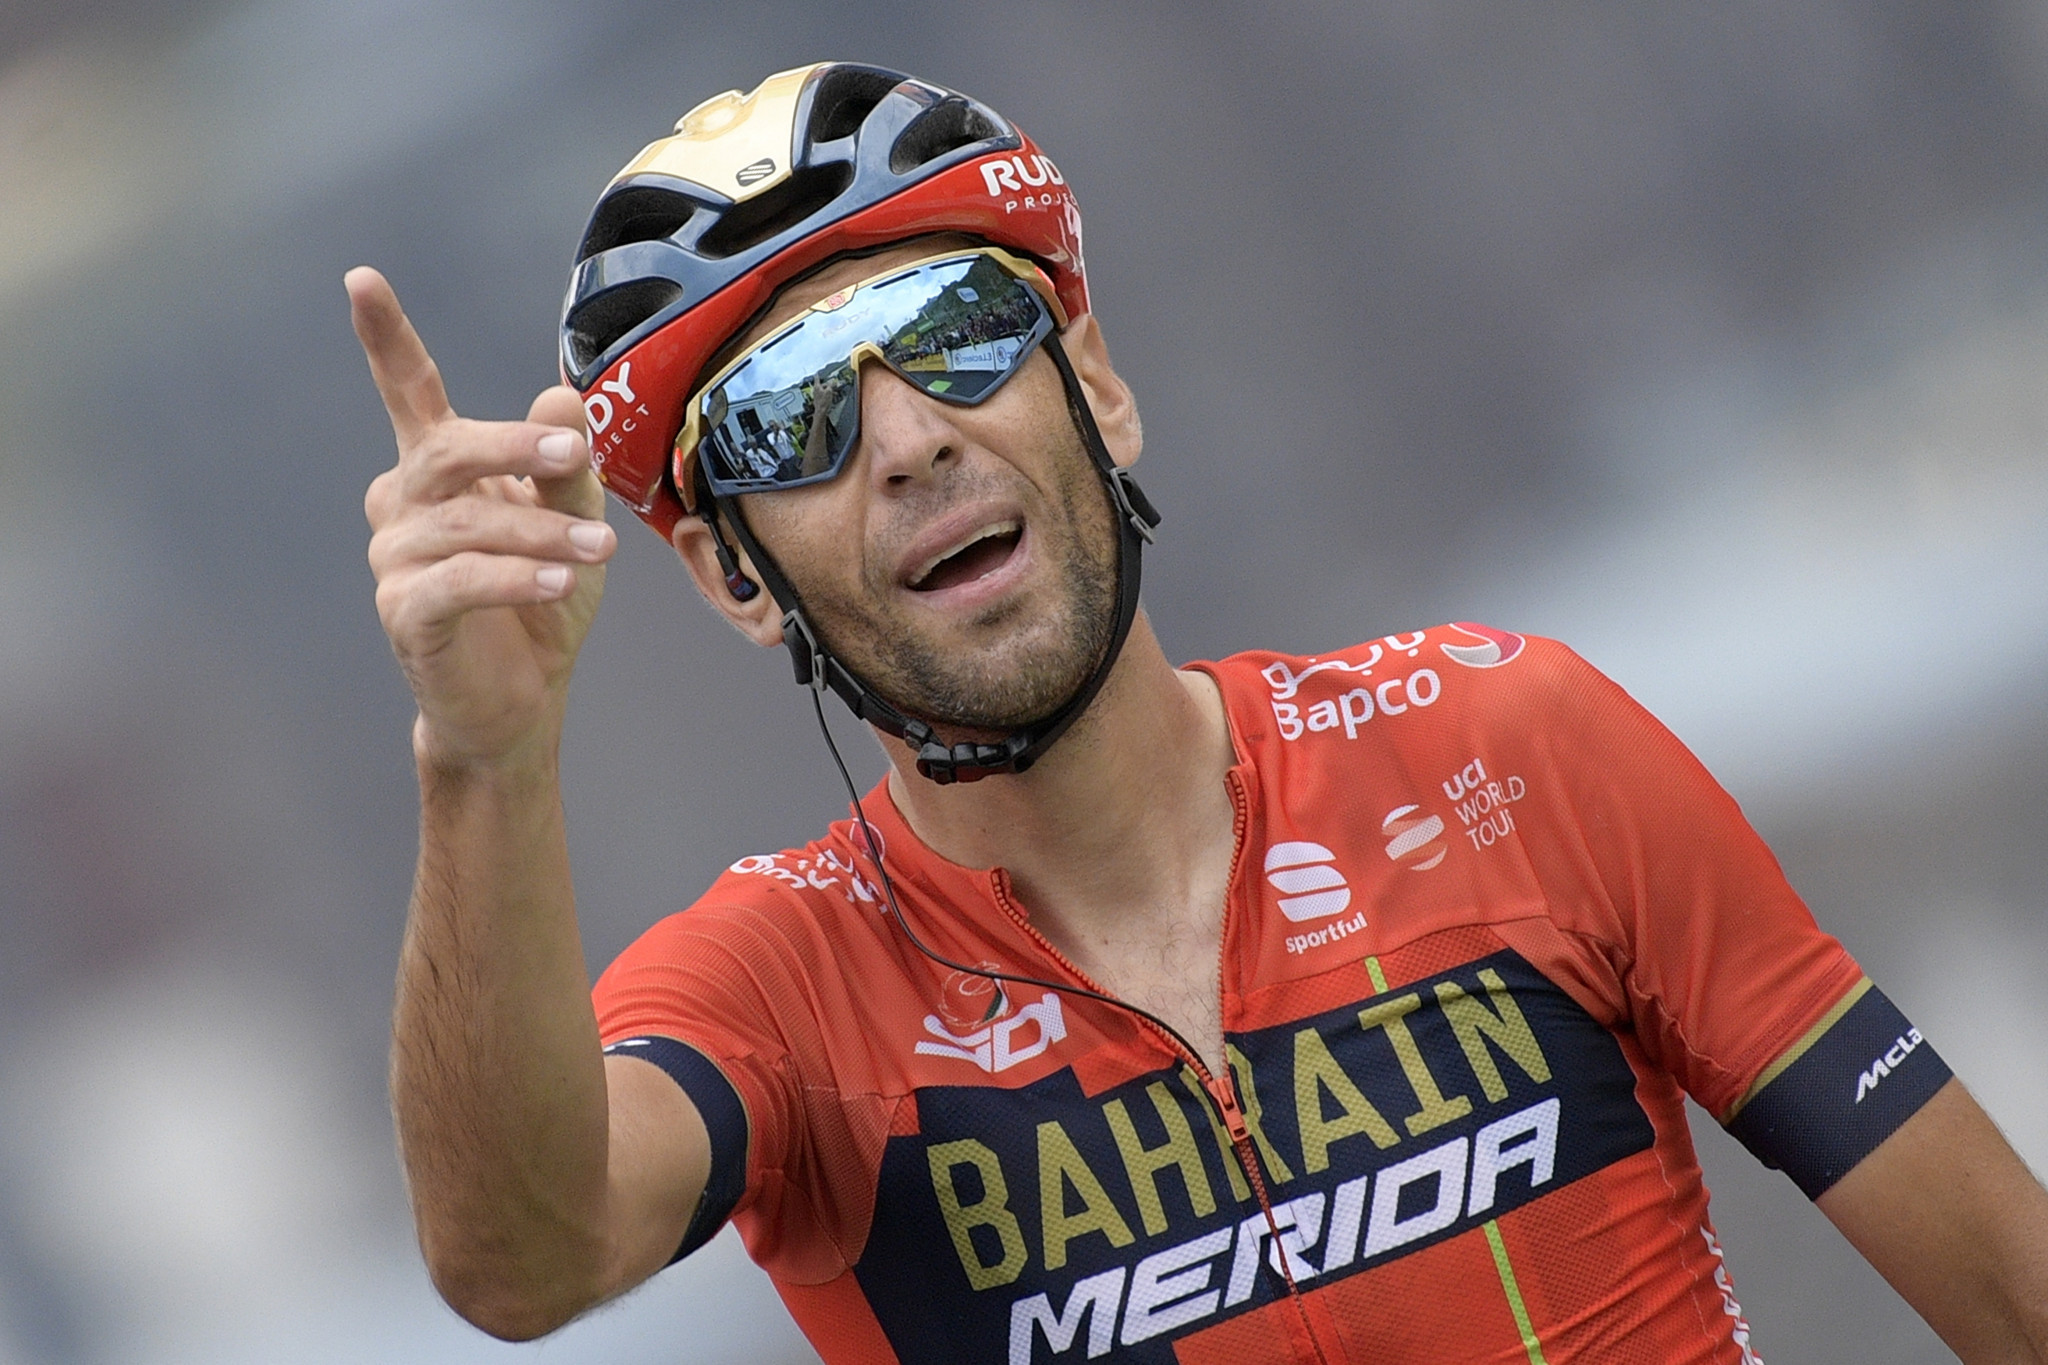 Nibali says skipping Tour de France to focus on Tokyo 2020 is logical